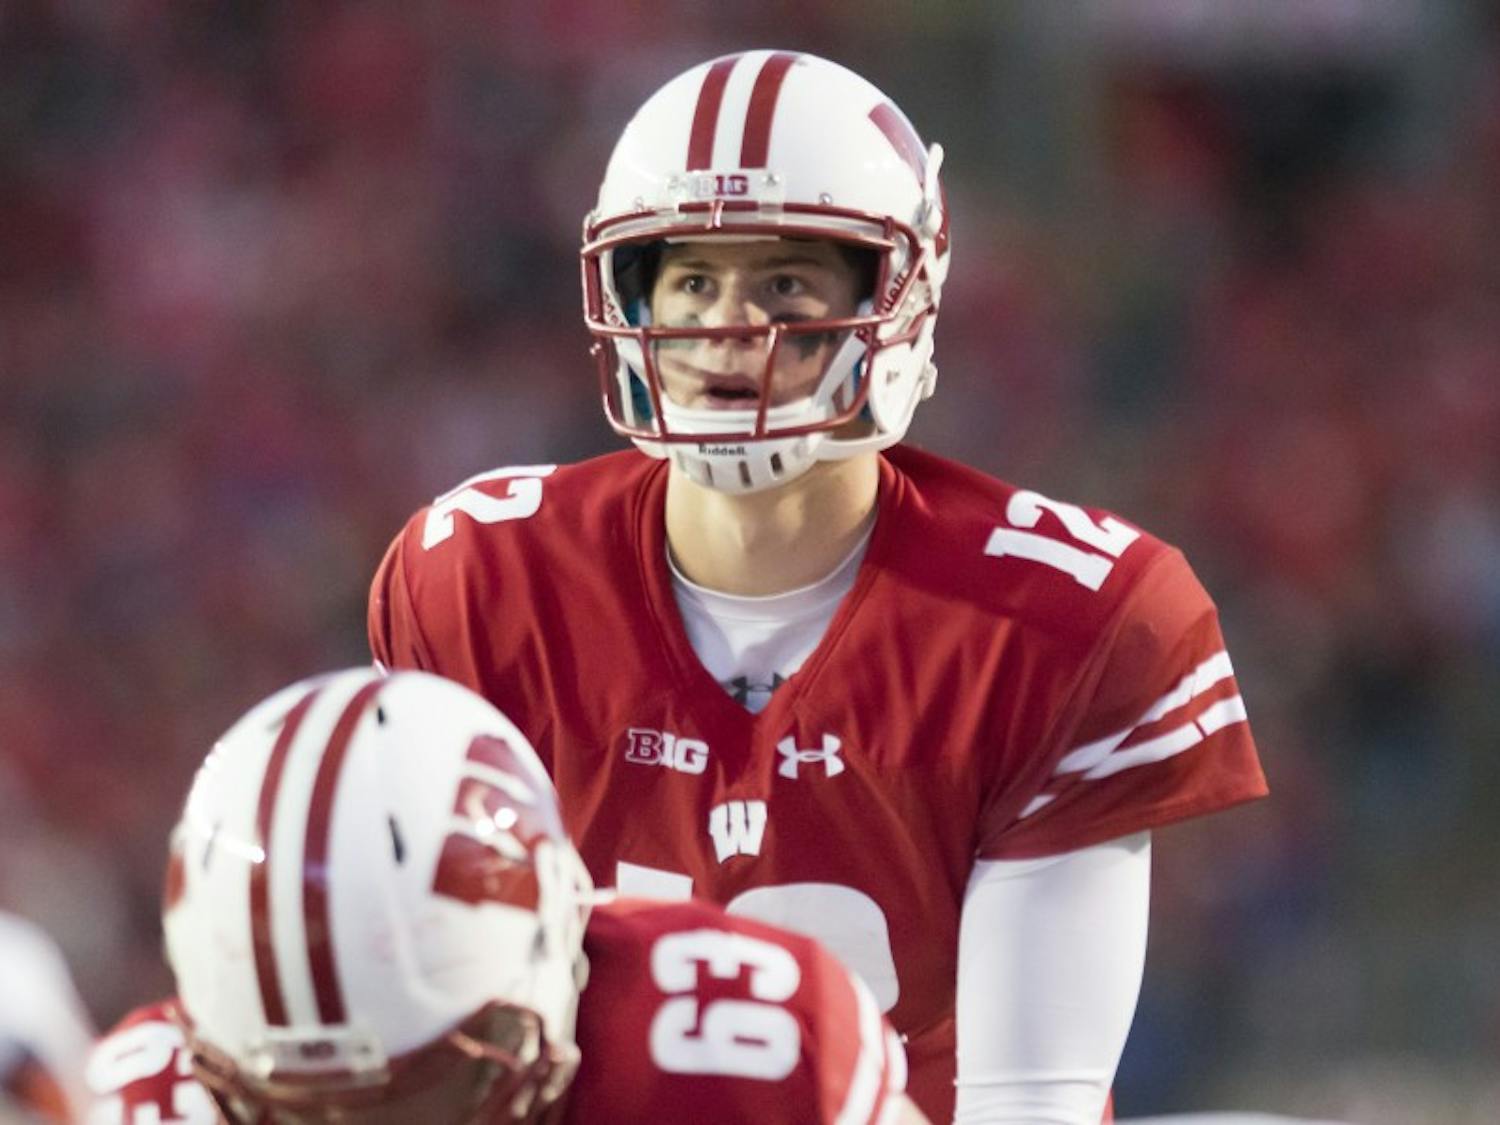 With senior Alex Hornibrook on his way out of the program, sophomore Jack Coan and freshman Graham Mertz are set to compete for Wisconsin's starting job.